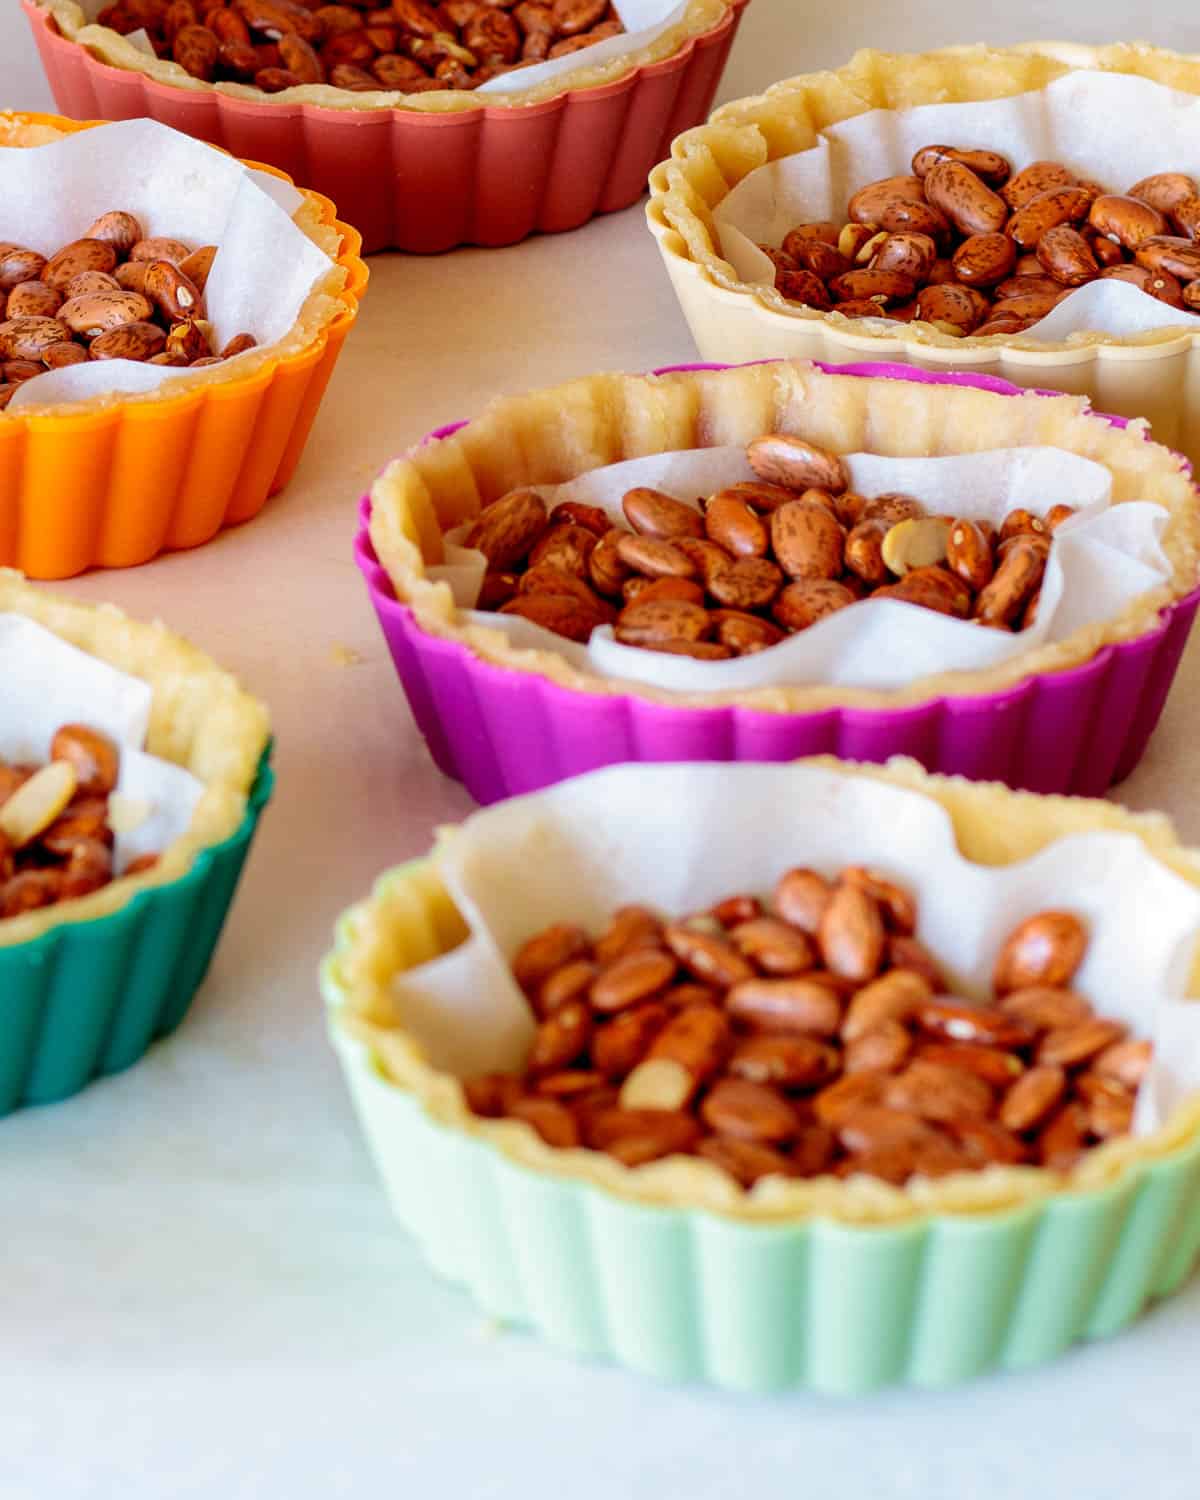 Tart shells shaped with parchment paper and beans.